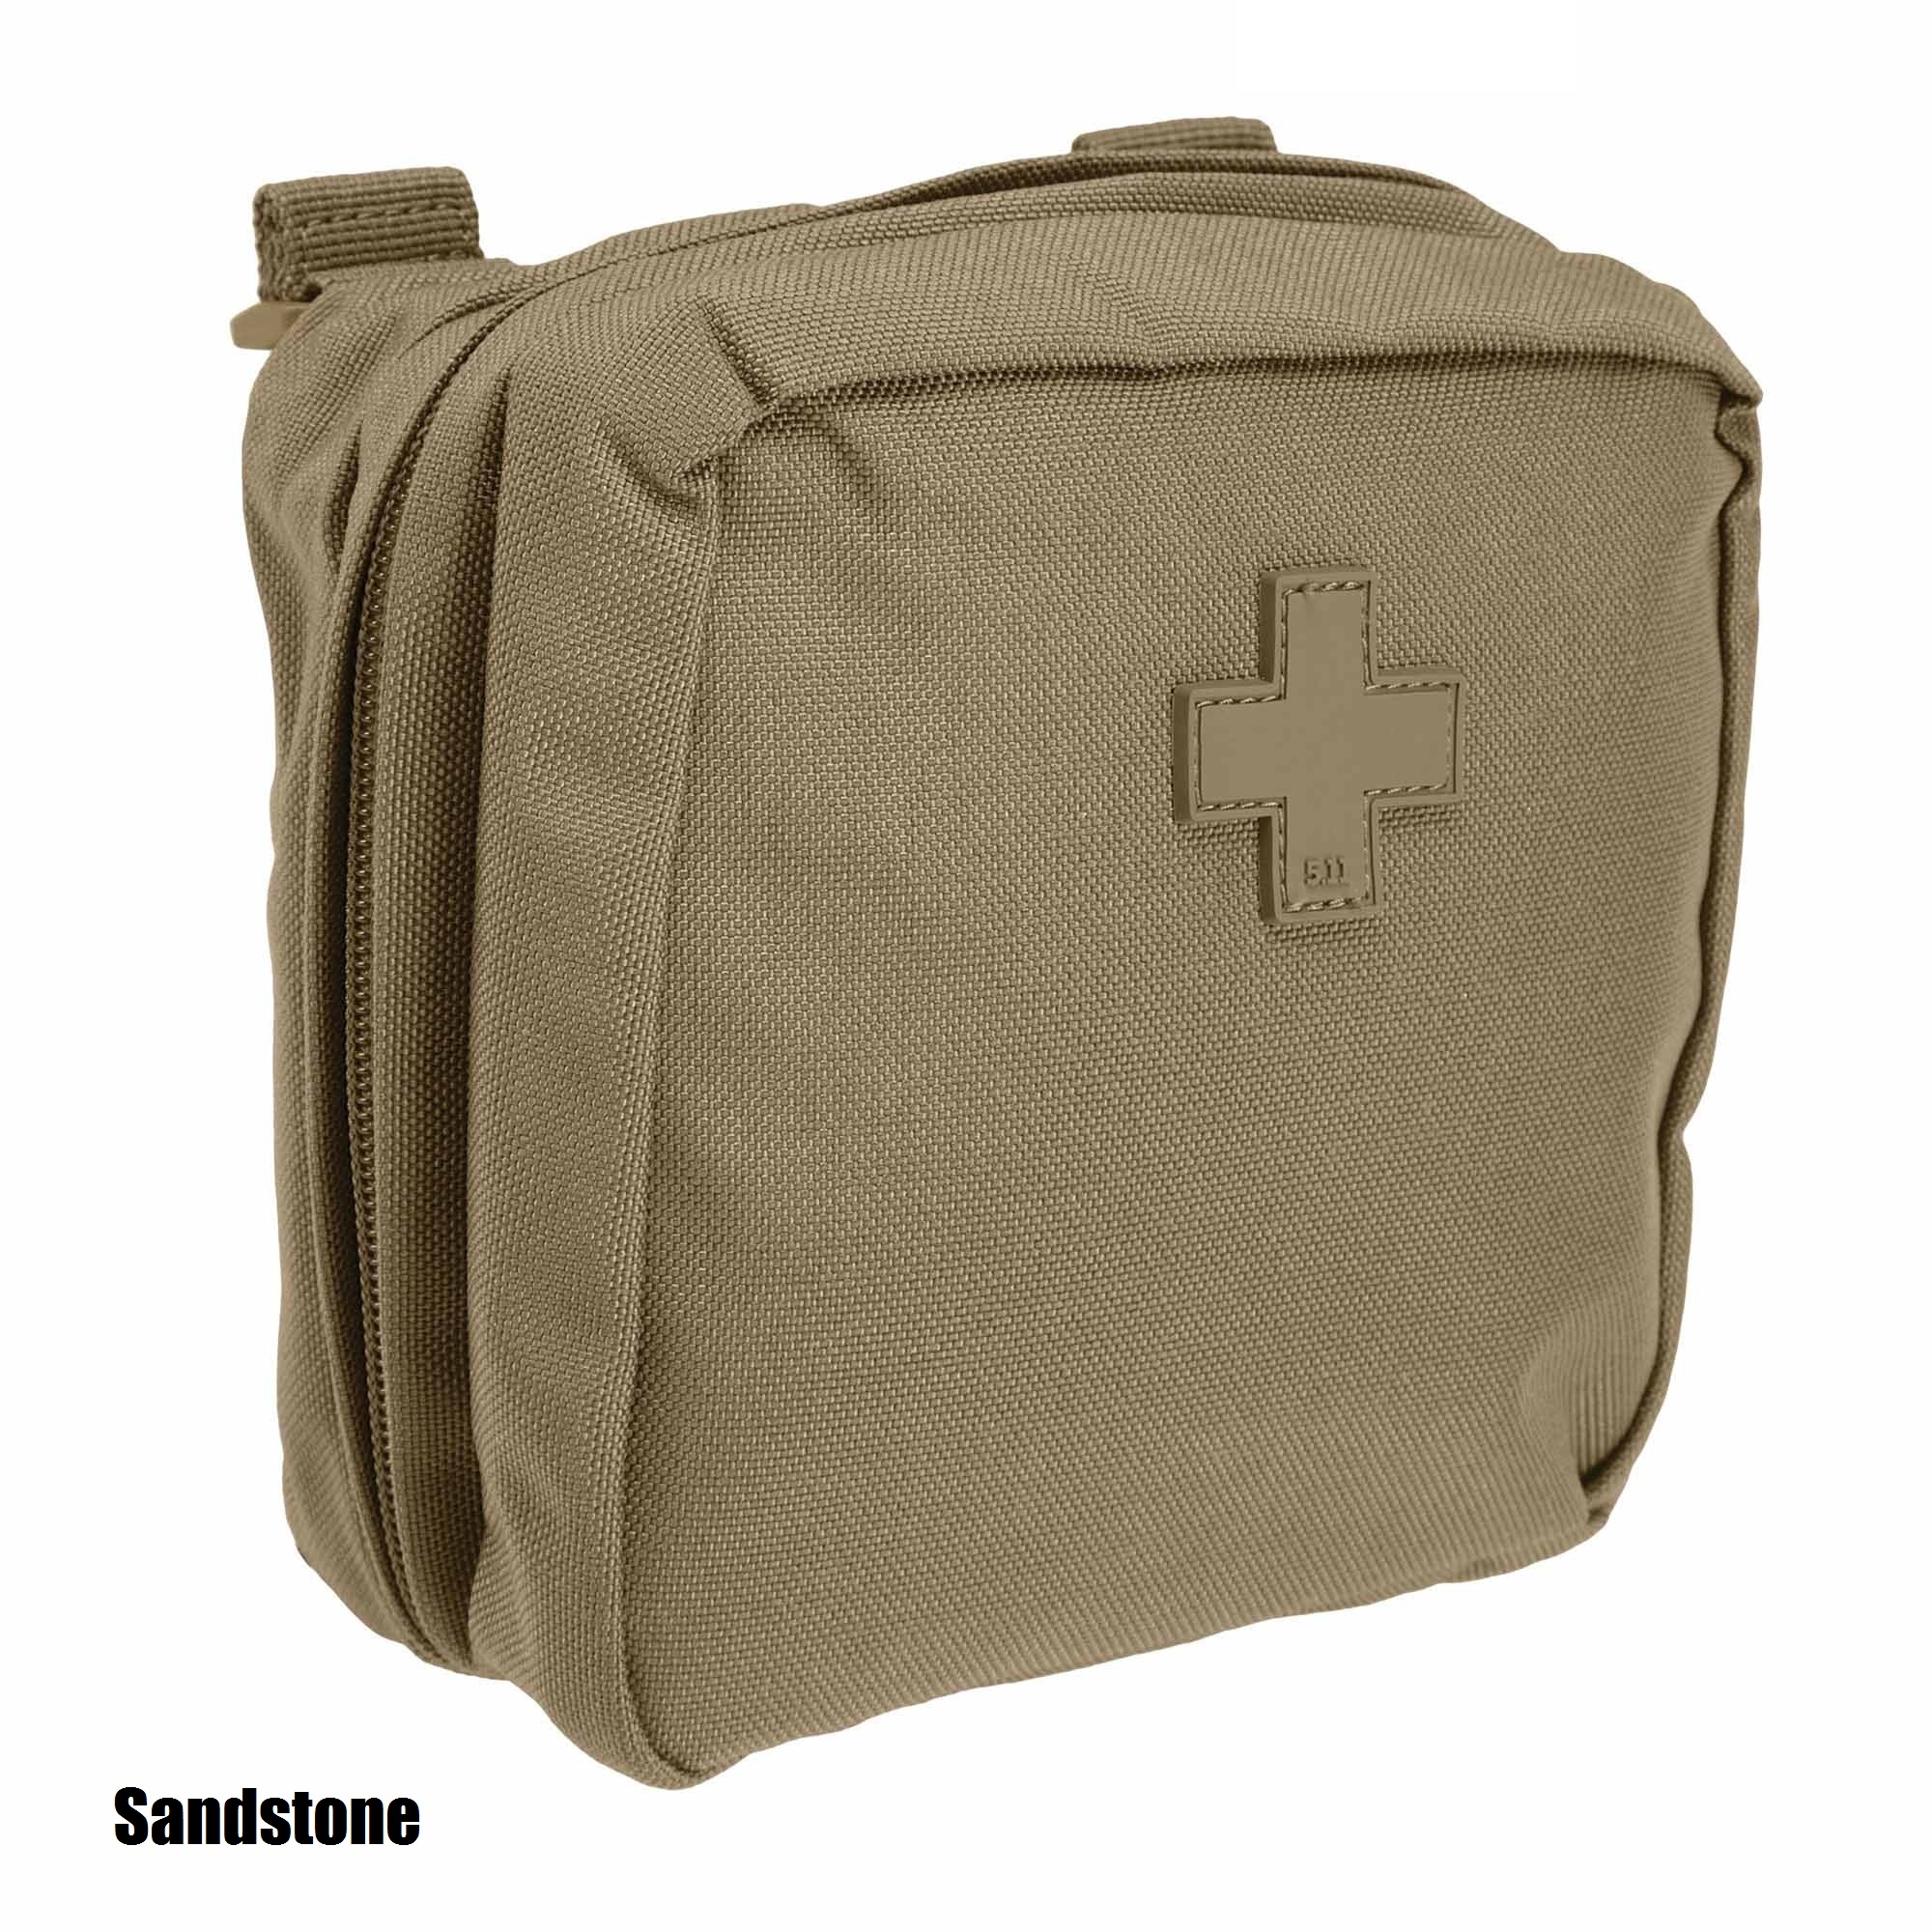 5.11 Med Pouch 6.6